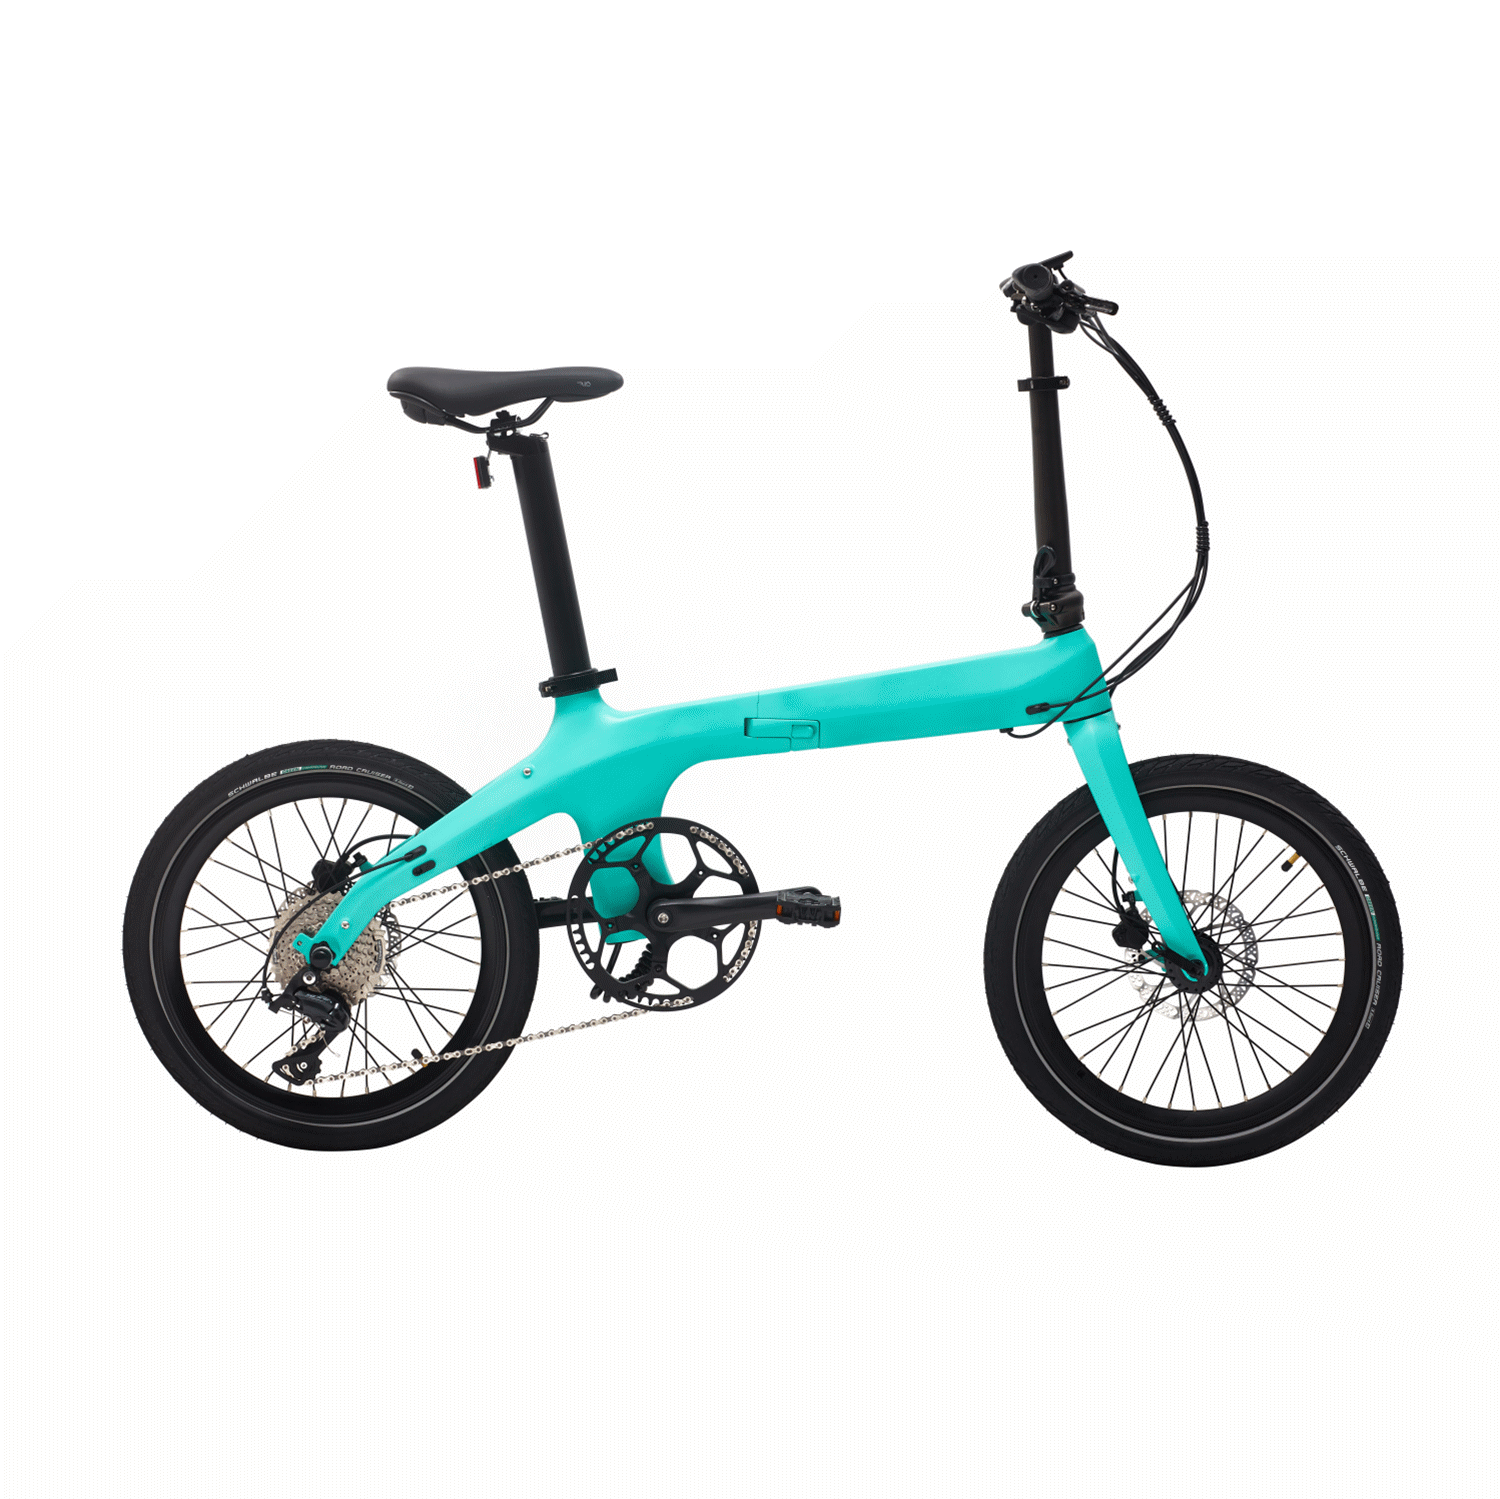 This new carbon fiber electric bike costs $999 - Blog - 10